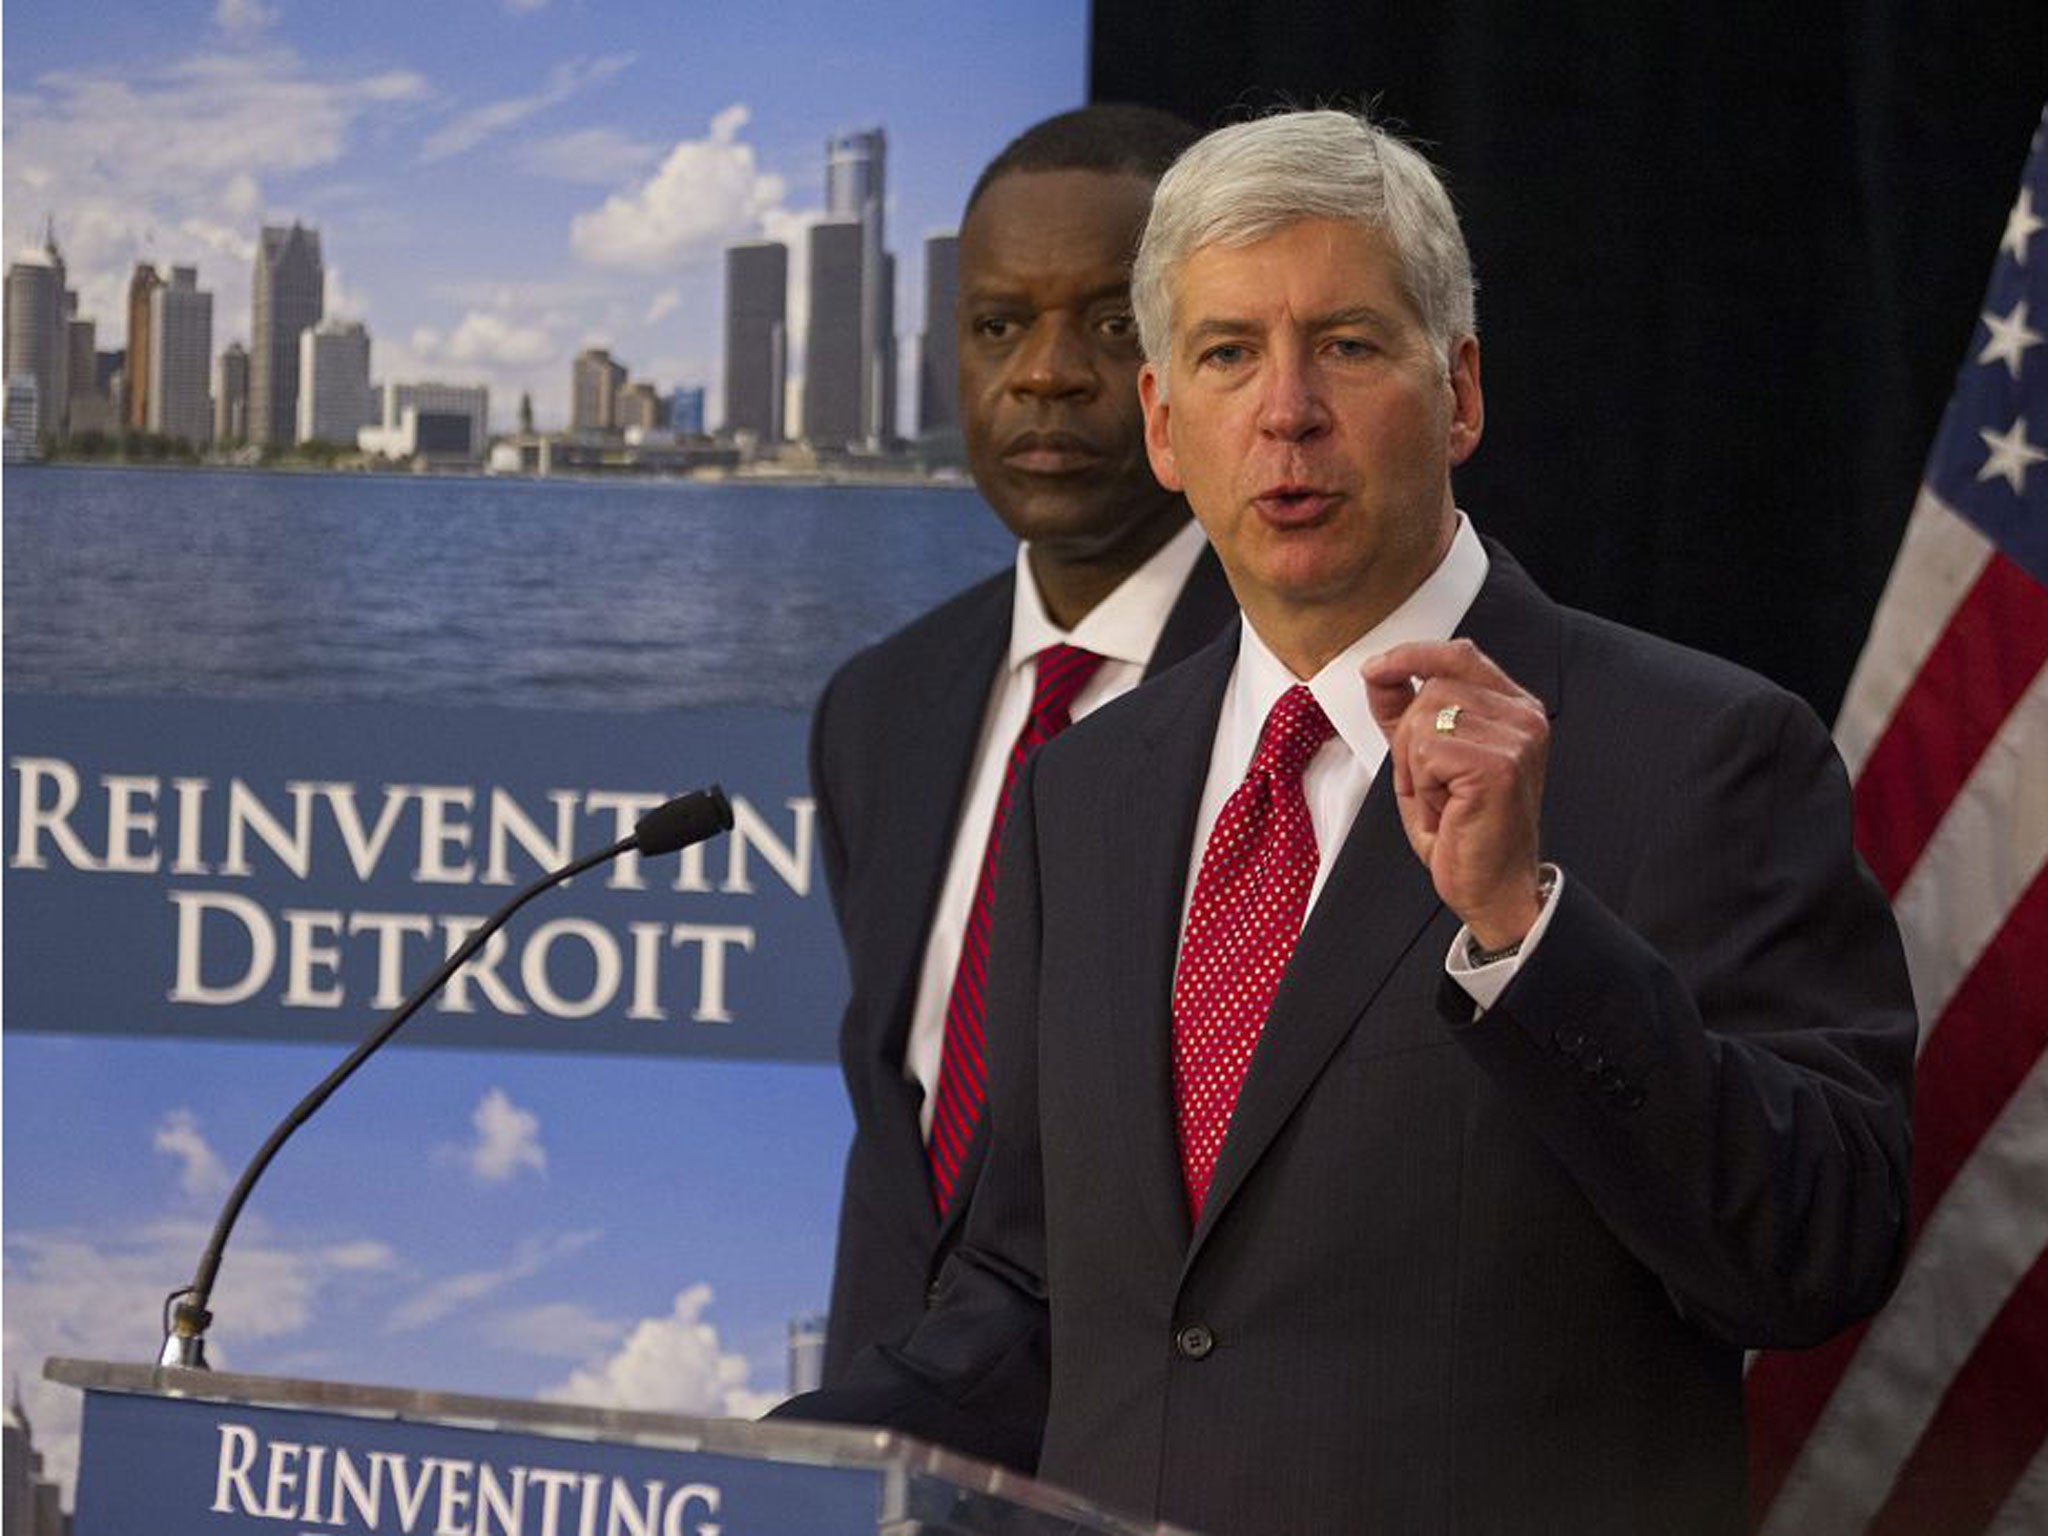 Michigan Governor Rick Snyder has moved to defend last week’s bankruptcy filing